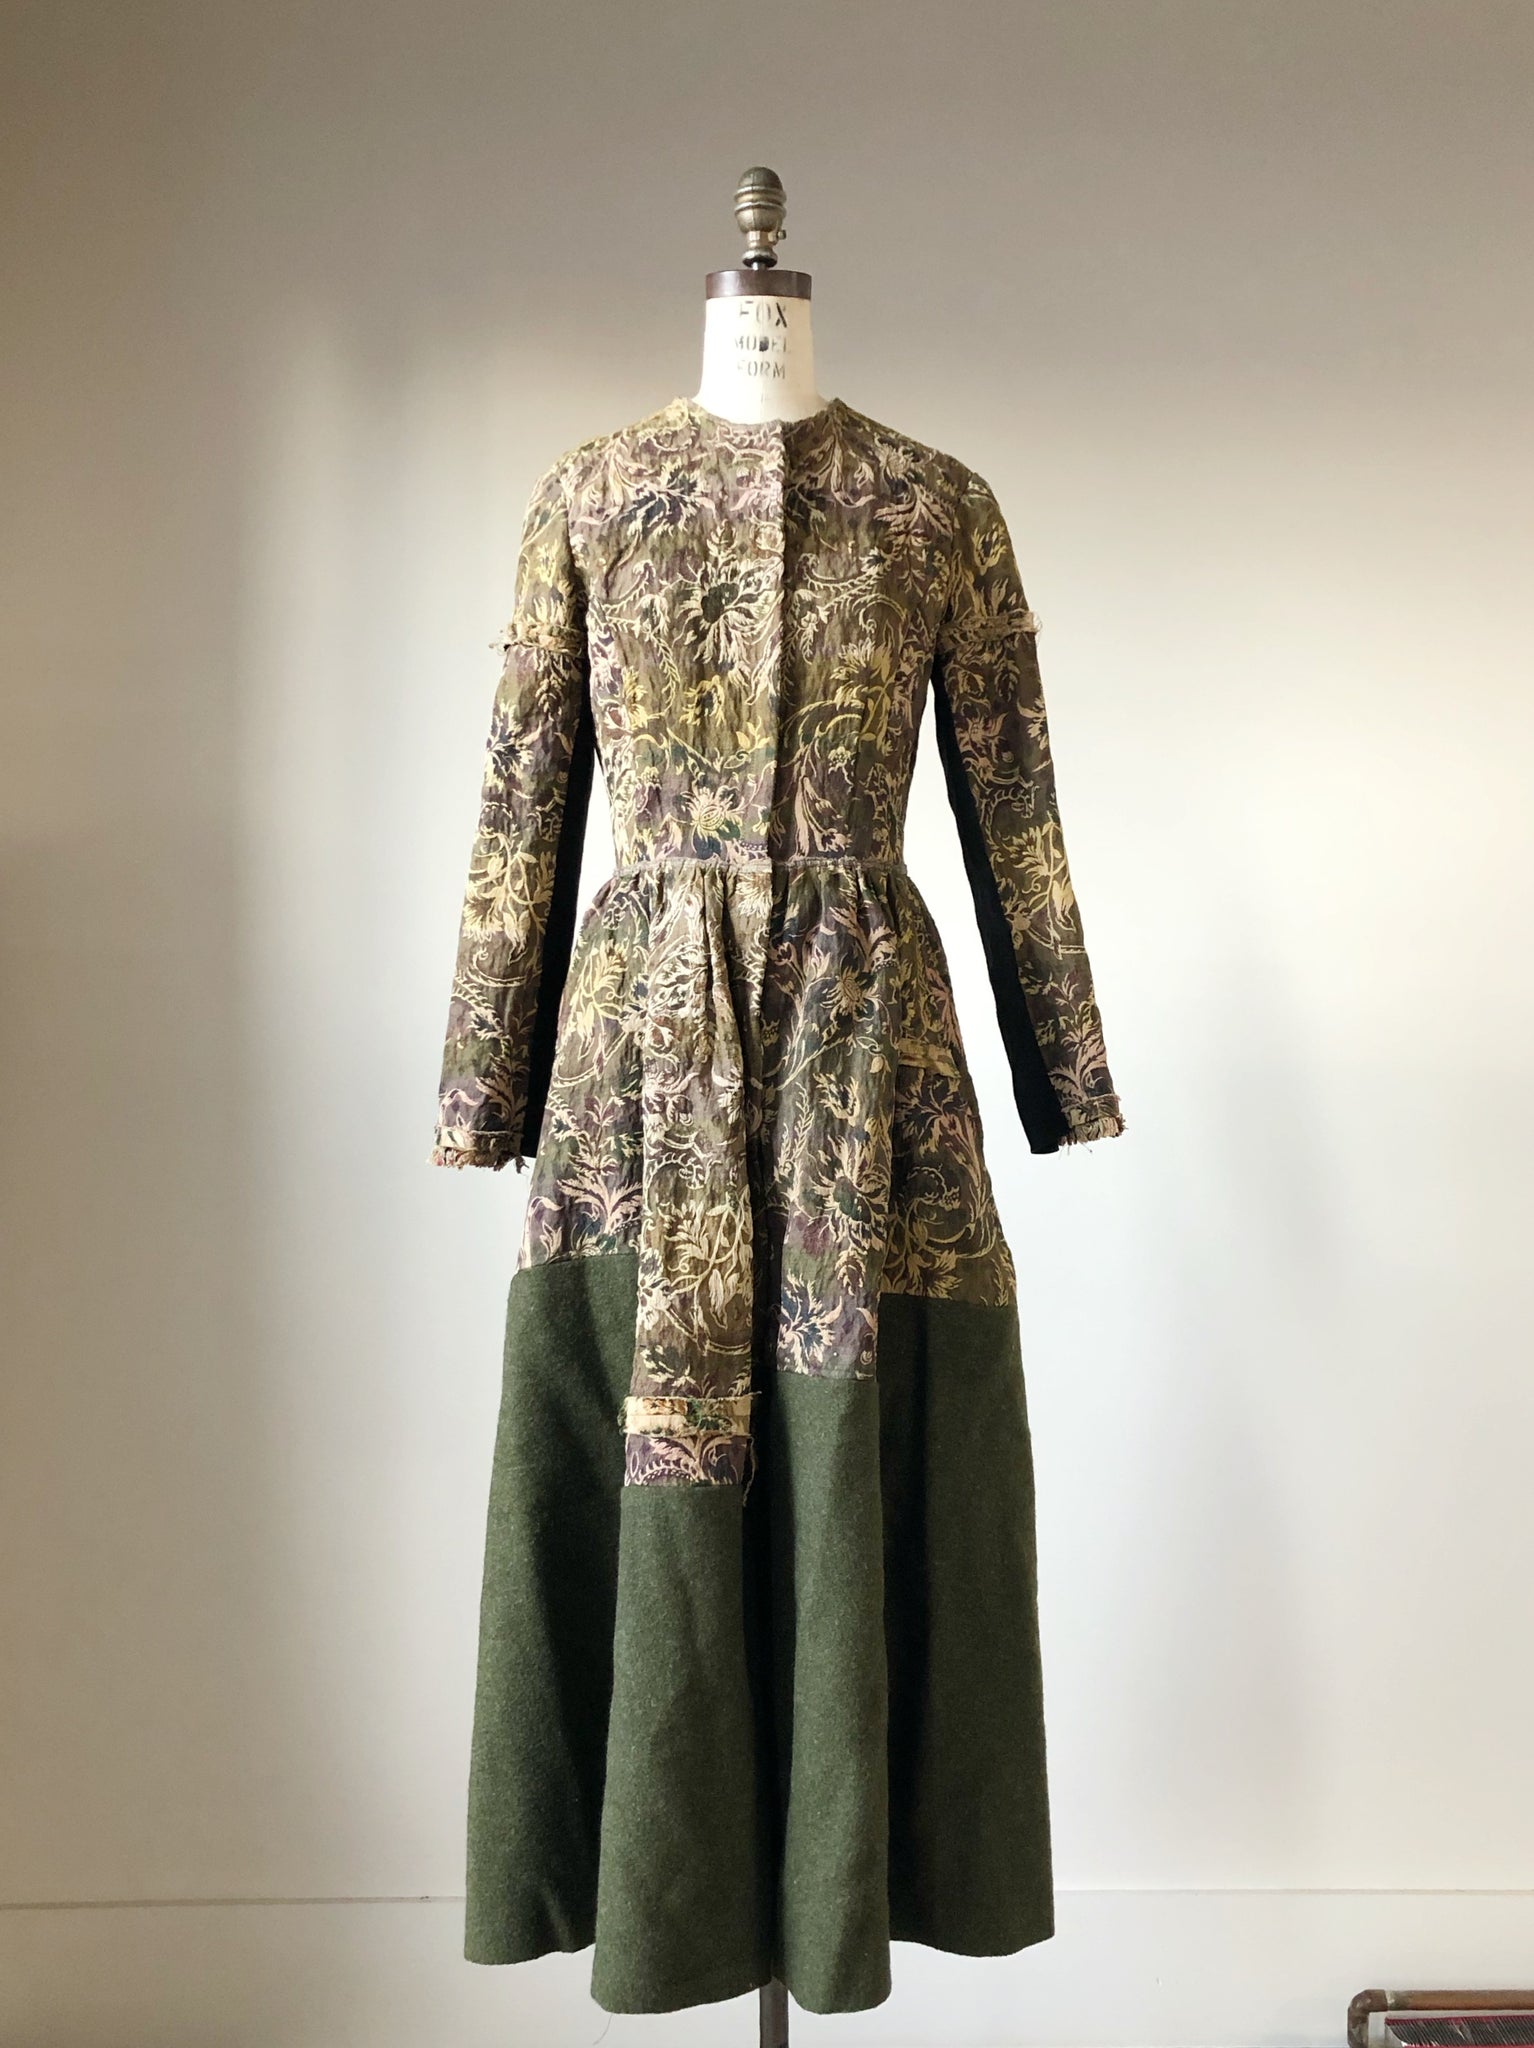 antique jacquard and army blanket coat dress